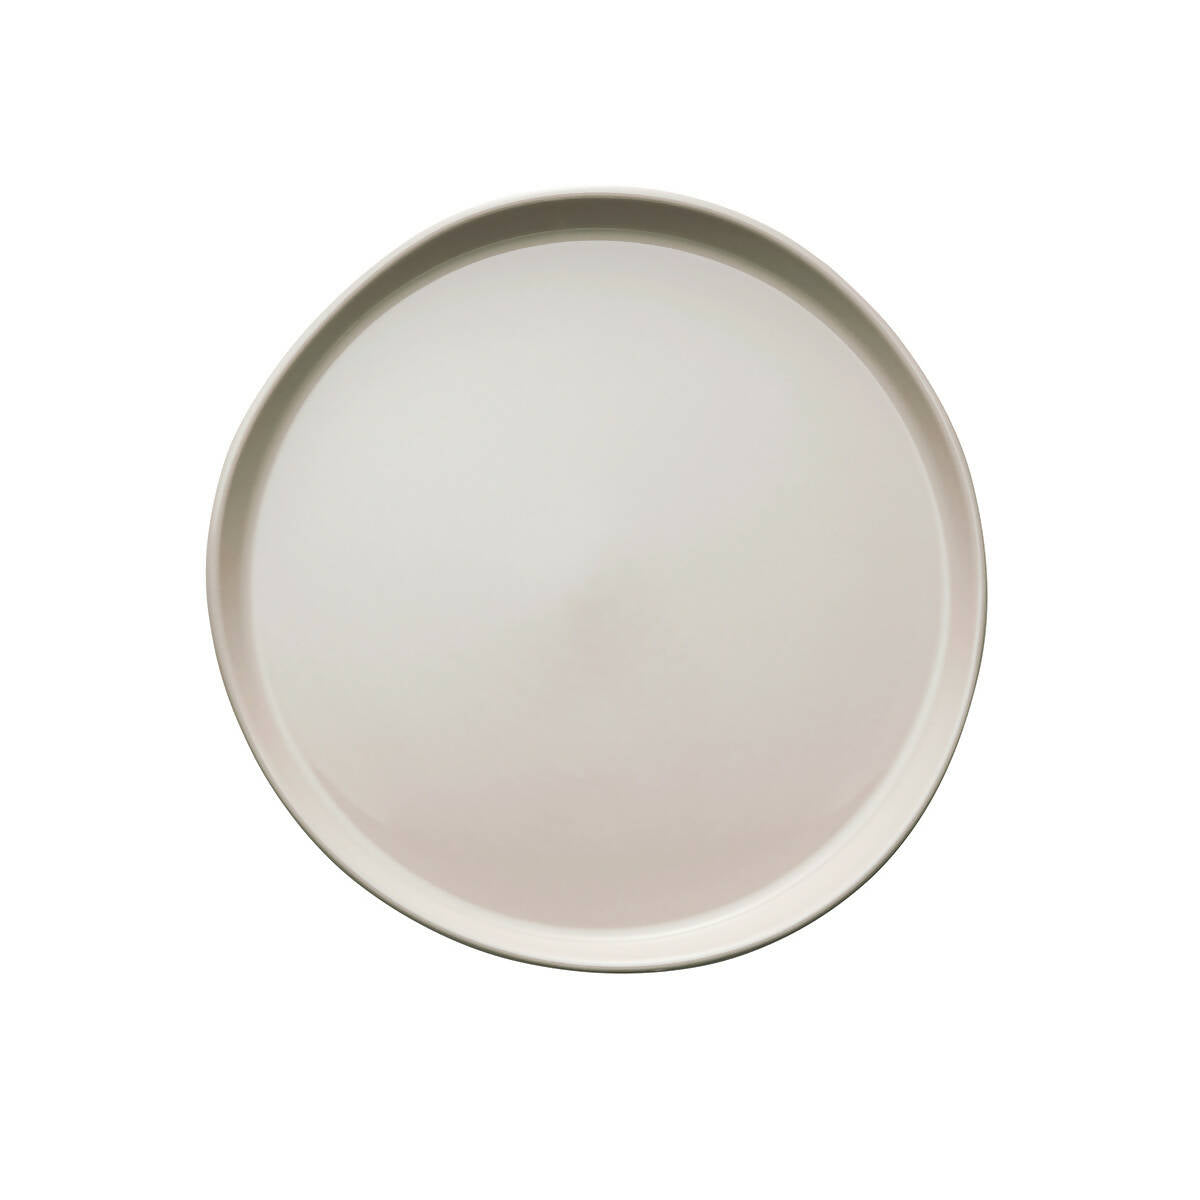 A white degrenne paris plate from the Brume collection